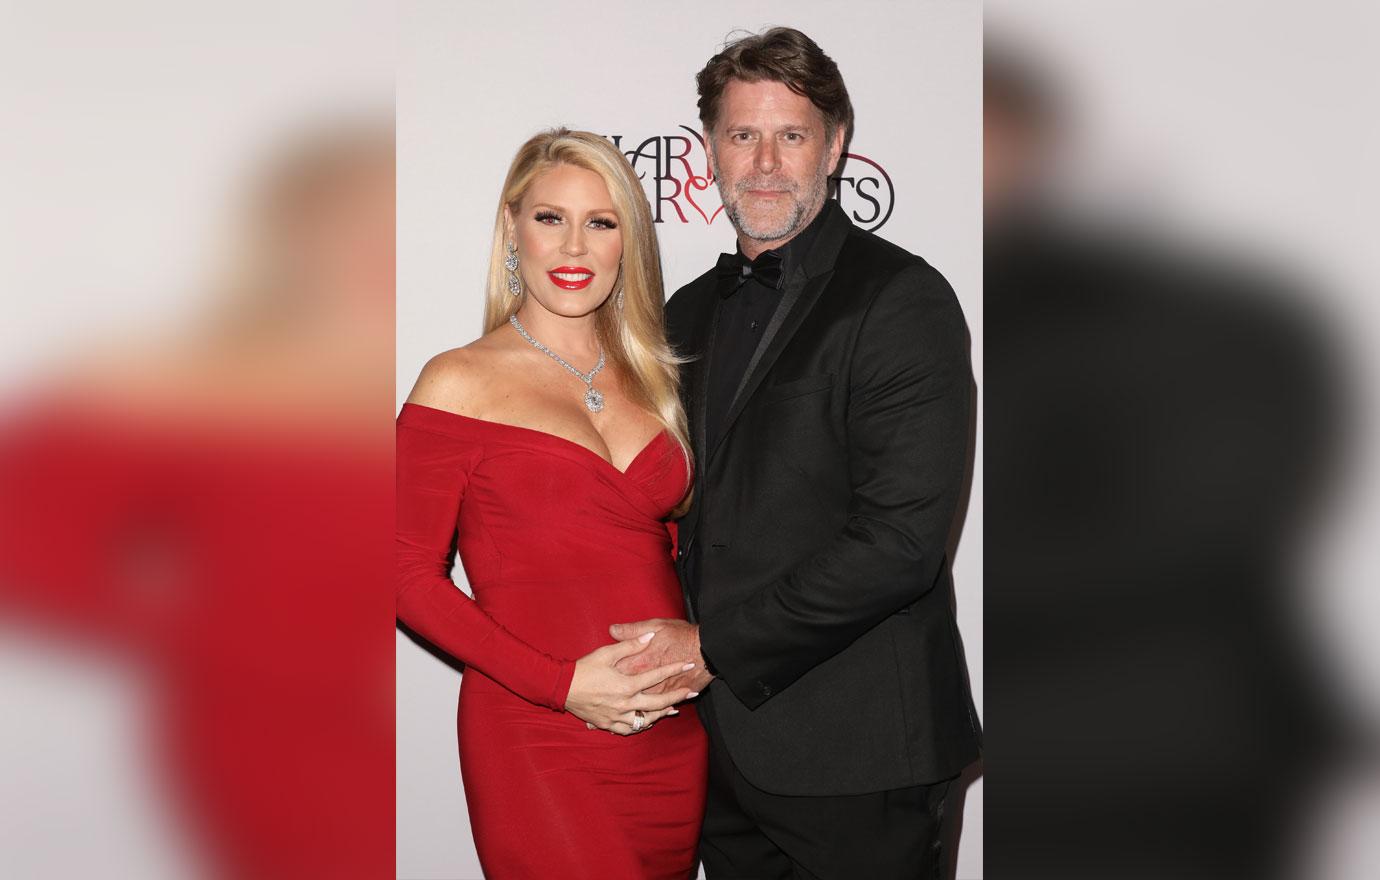 RHOC Very Pregnant Gretchen Rossi Shares Near-Naked Snap hq image